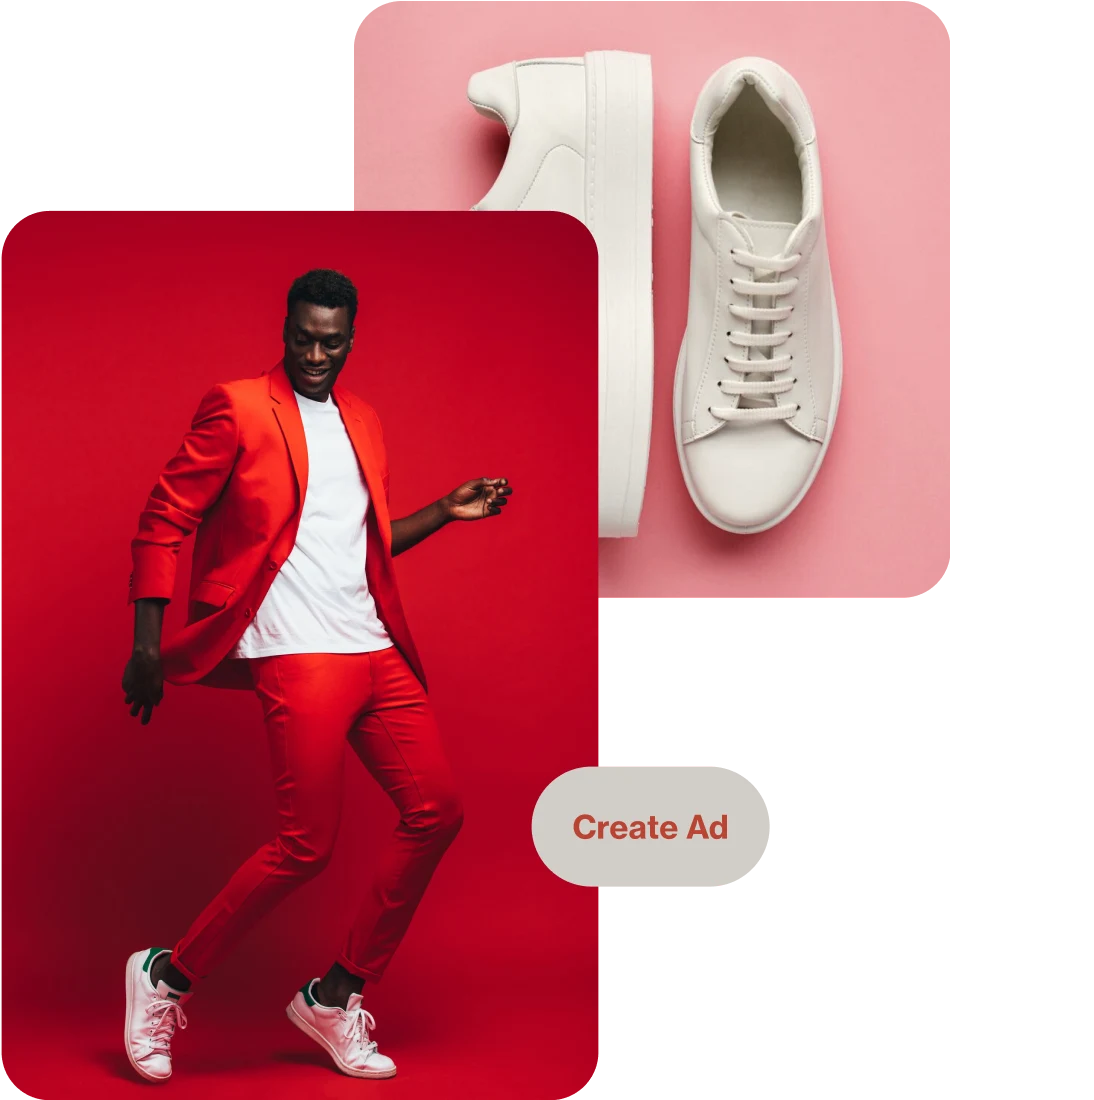 Two Pins depicting a pair of white trainers on a pink background and a dancing Black man dressed in a red suit, white t-shirt and white trainers on a red background